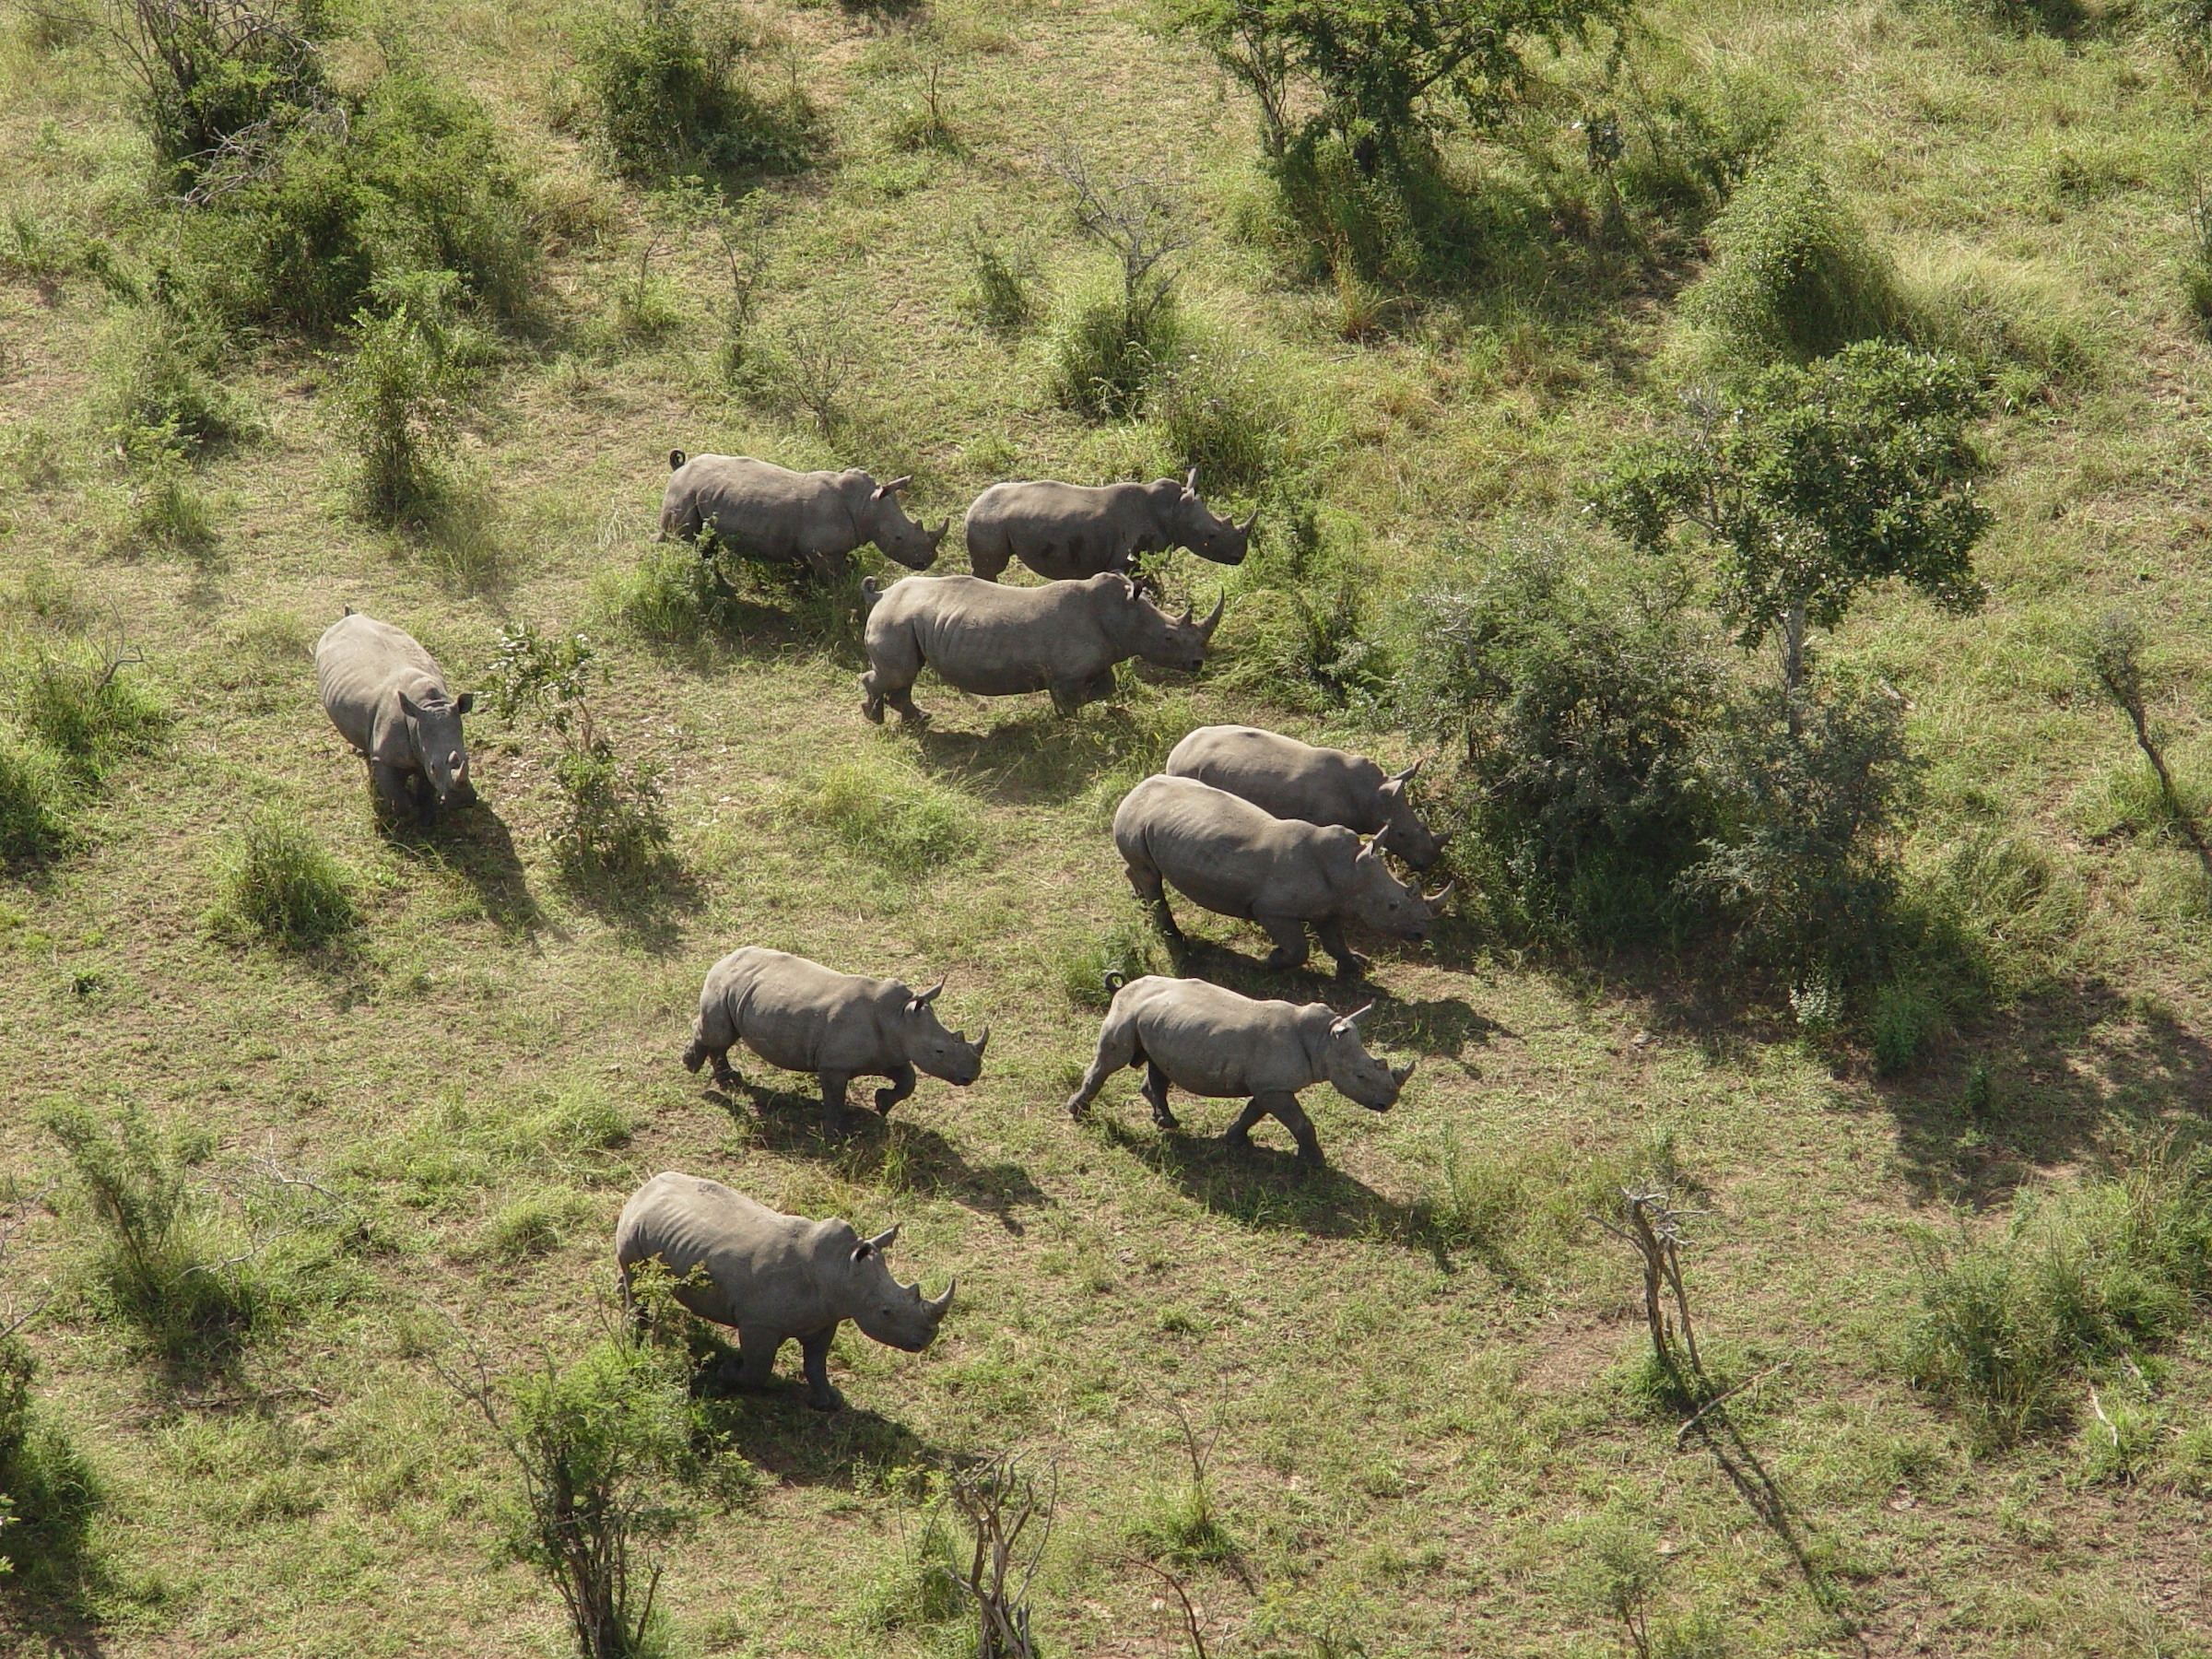 White rhino herd in Kruger National Park, South Africa